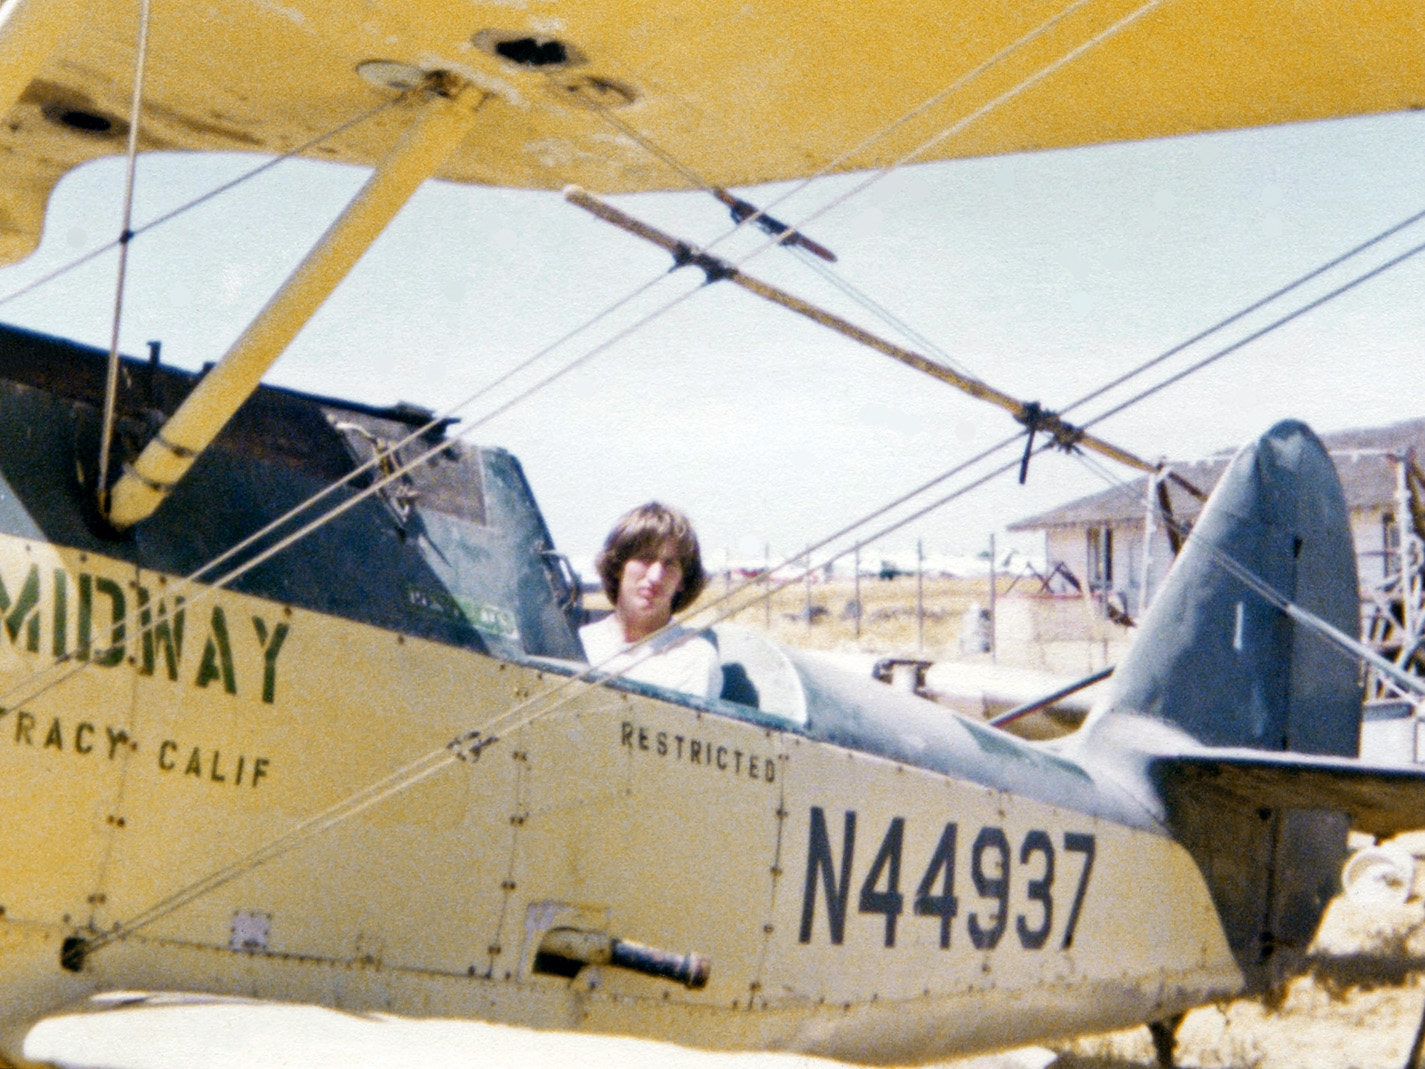 There I am at the August 1979 Madera, California "Gathering of Warbirds" airshow and I am sitting in a derelict WWII-era Naval Aircraft Factory N3N Navy flight training biplane. It had been sold surplus after its military service and converted into a crop duster and no doubt saw heavy use before it was retired, parted-out, and pushed into the weeds. I just had to climb in and my friend took the picture. View full size.